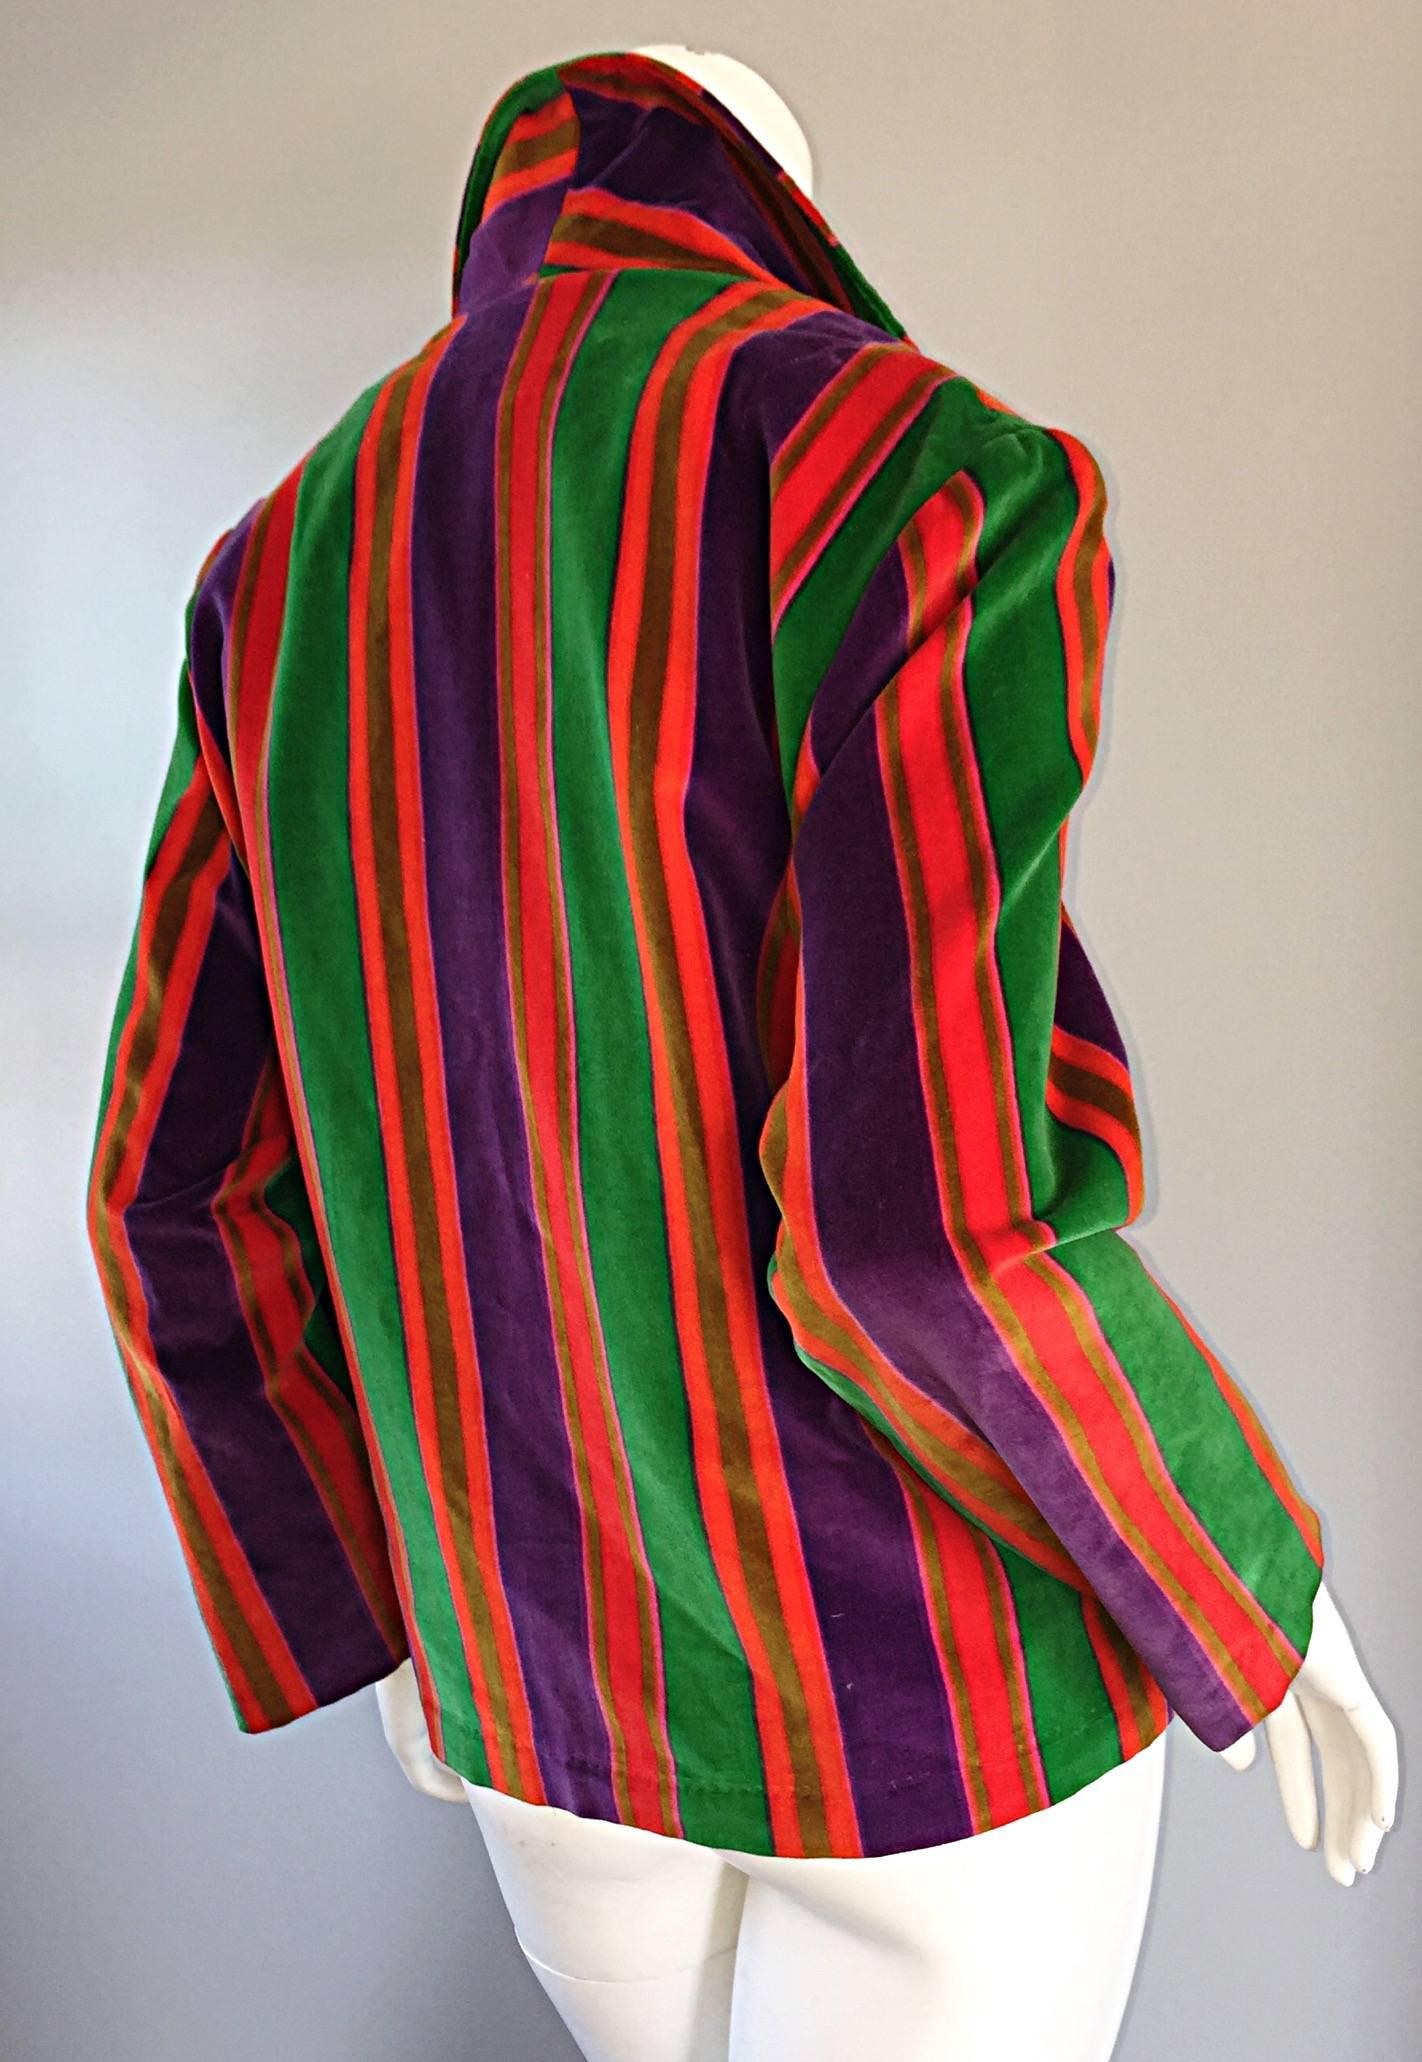 Wonderful vintage 1970s I. Magnin rainbow striped velvet blazer! A real statement jacket, that can easily be dressed up, or down. Great alone, or belted. Two pockets at each side of the waist. Fully lined. In great condition. Approximately Size